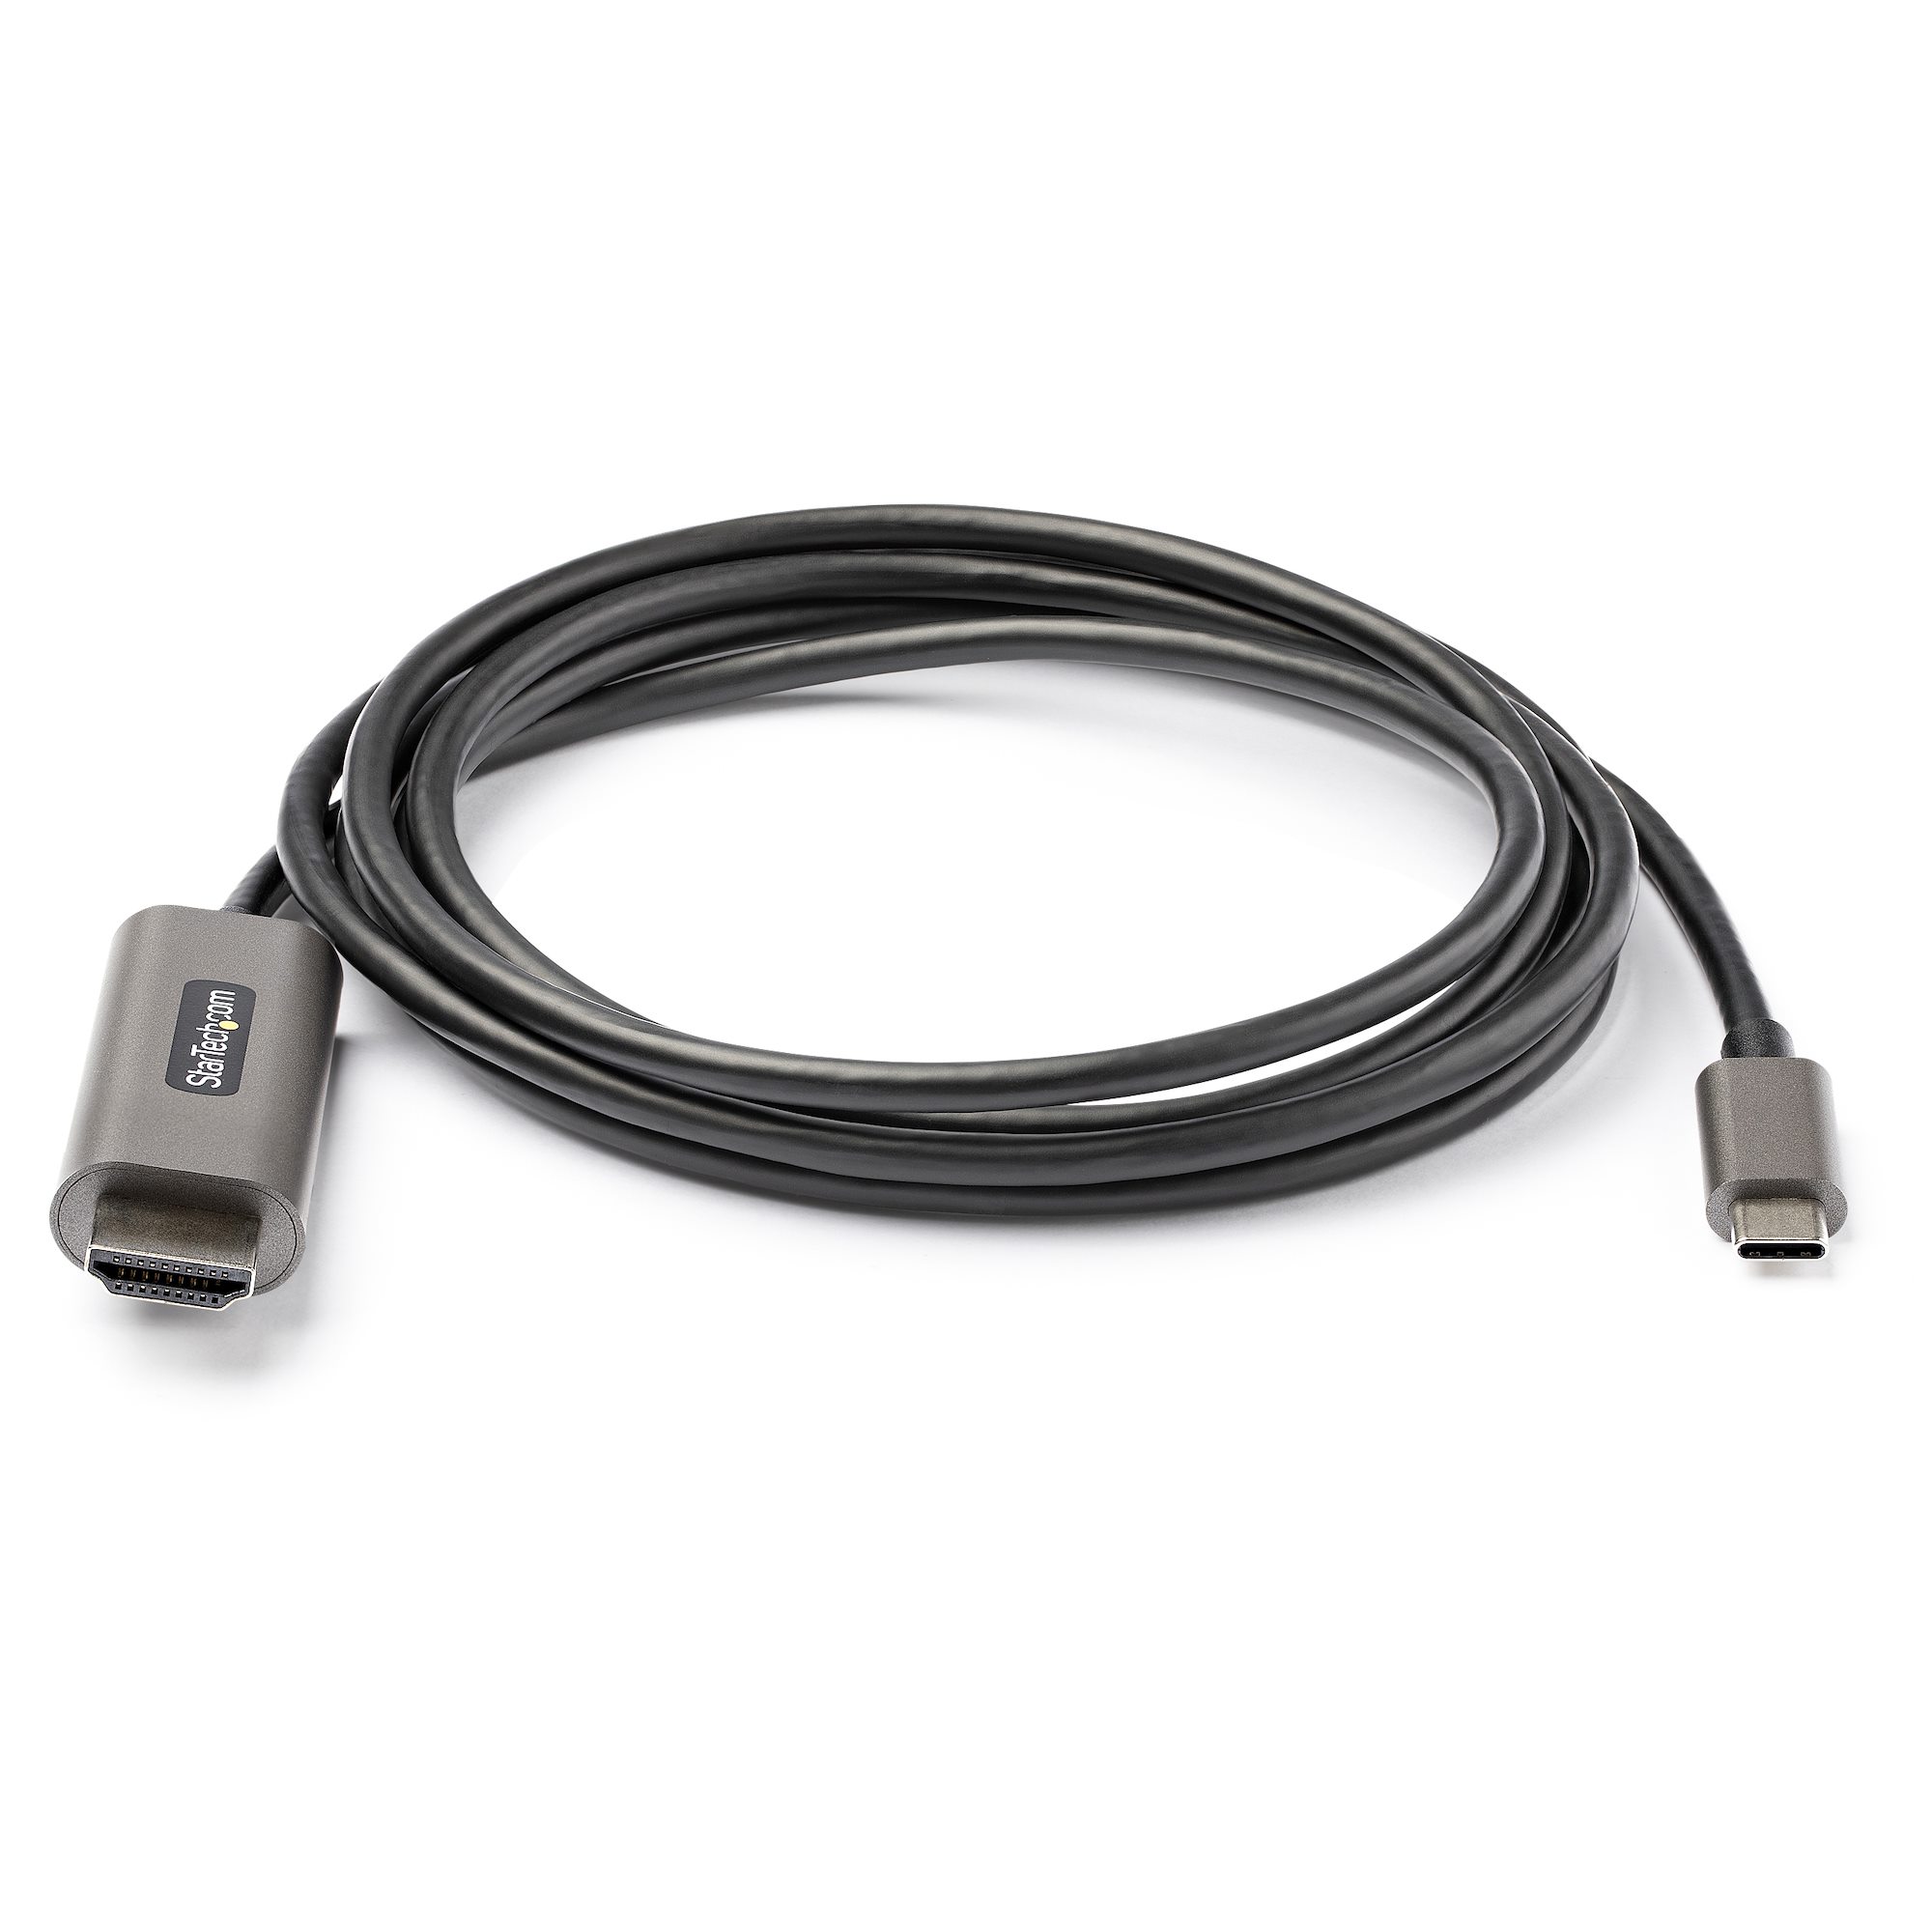 KabelDirekt – 6 feet – USB-C to HDMI Adapter & Cable (up to 4K